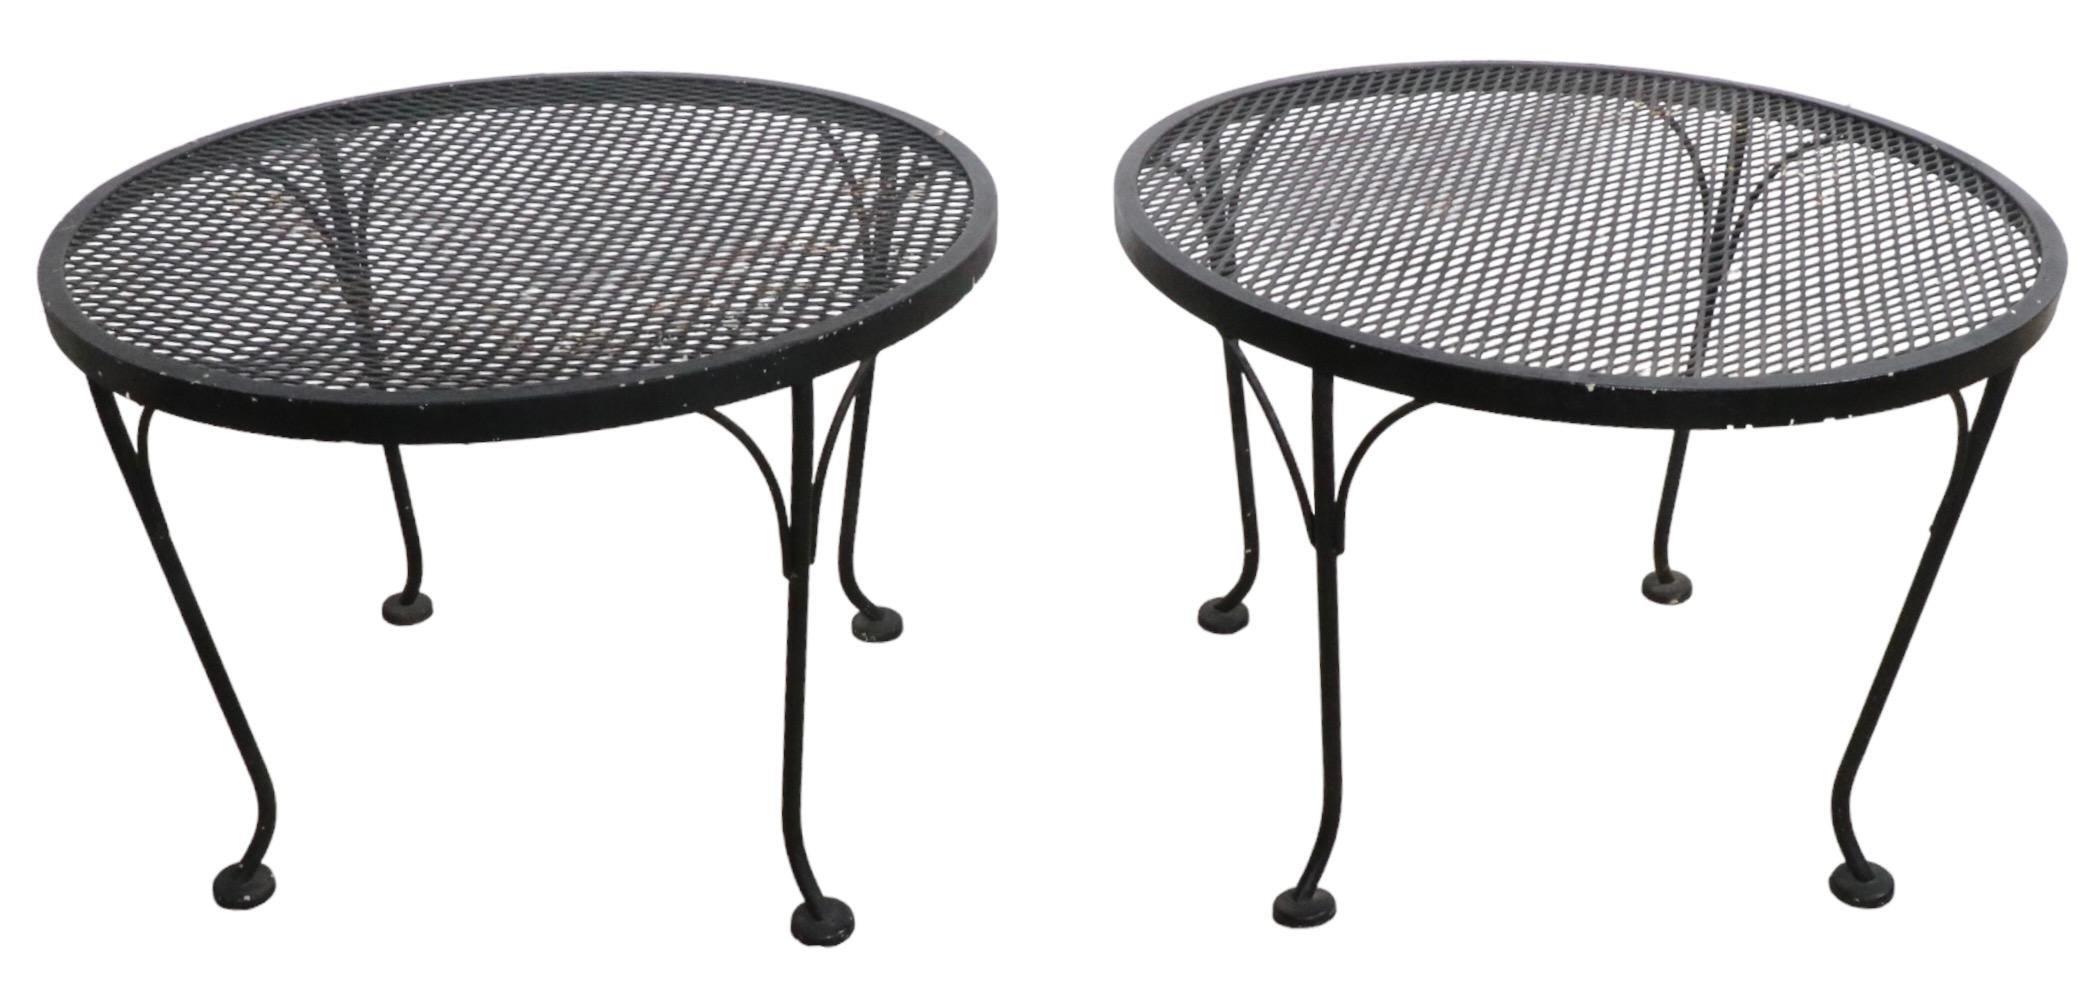 Wrought Iron and Metal Mesh Garden Patio Poolside Side Tables by Woodard 4